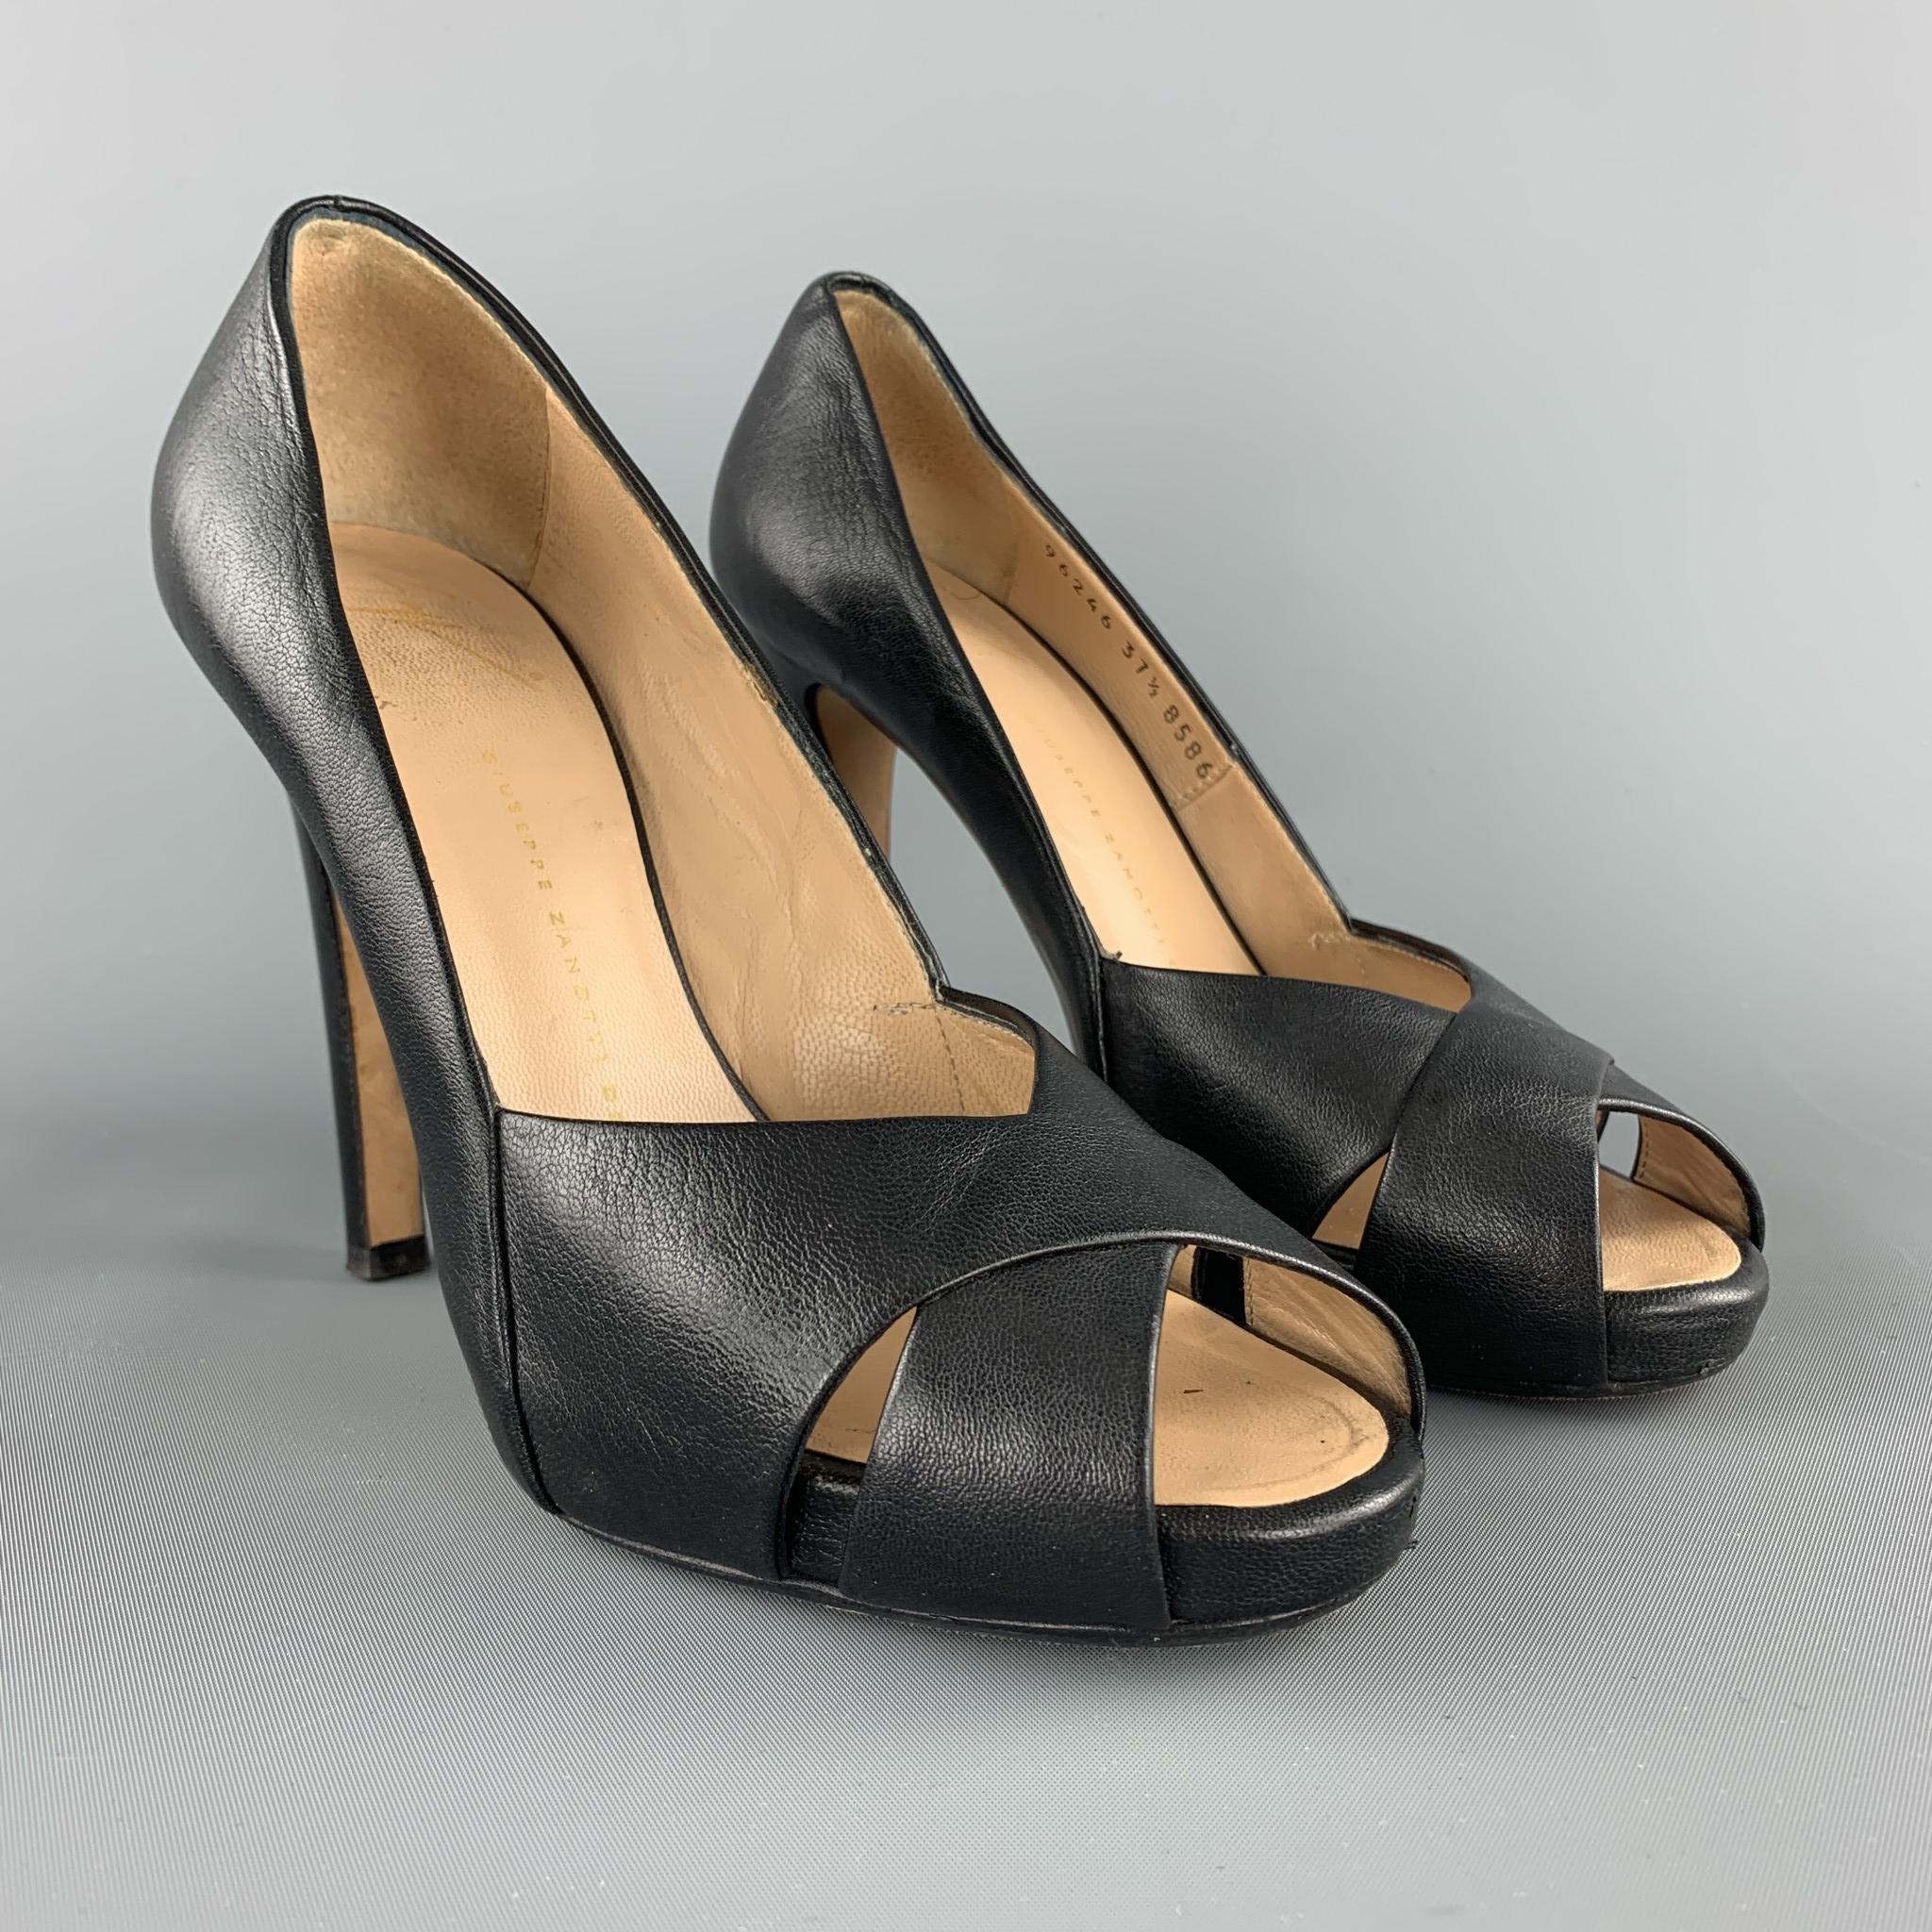 GUISEPPE ZANOTTI pumps come in black leather with a stacked heel and peep toe X strap. Made in Italy.

Excellent Pre-Owned Condition.
Marked: IT 37.5 

Heel: 4.5 in.
Platform: 0.65 in.
SKU: 103655
Category: Pumps

More Details
Brand: GIUSEPPE